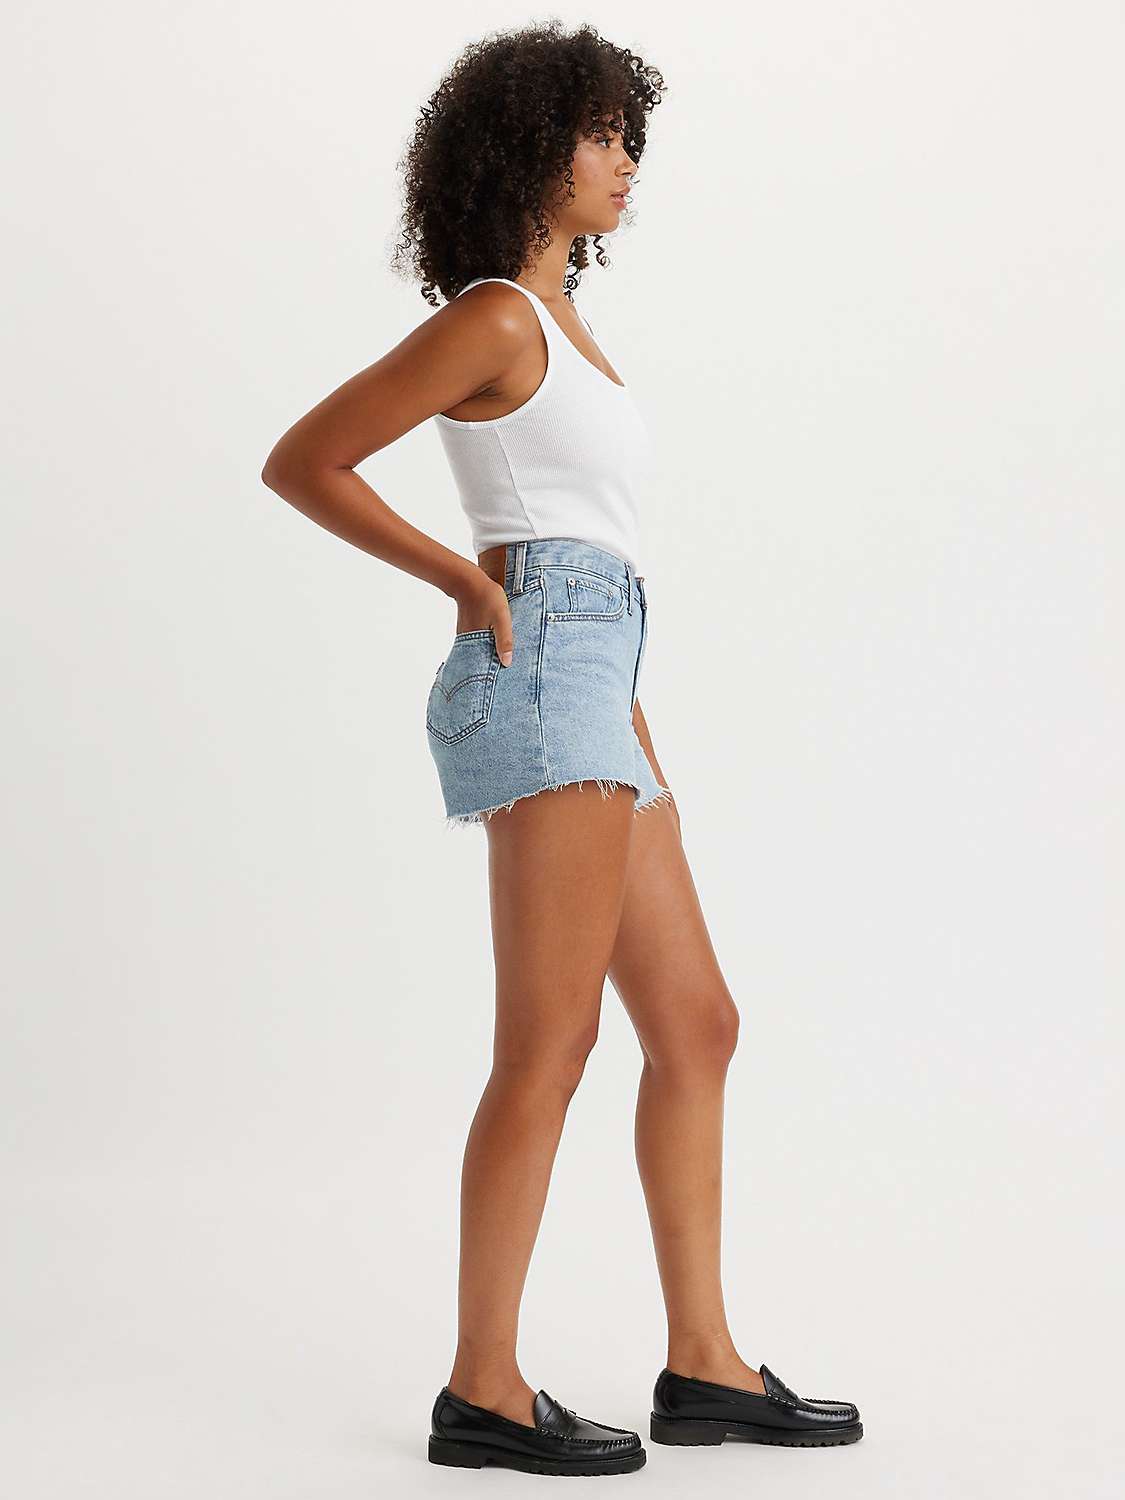 Buy Levi's 80s Denim Mom Shorts, Make A Difference Online at johnlewis.com